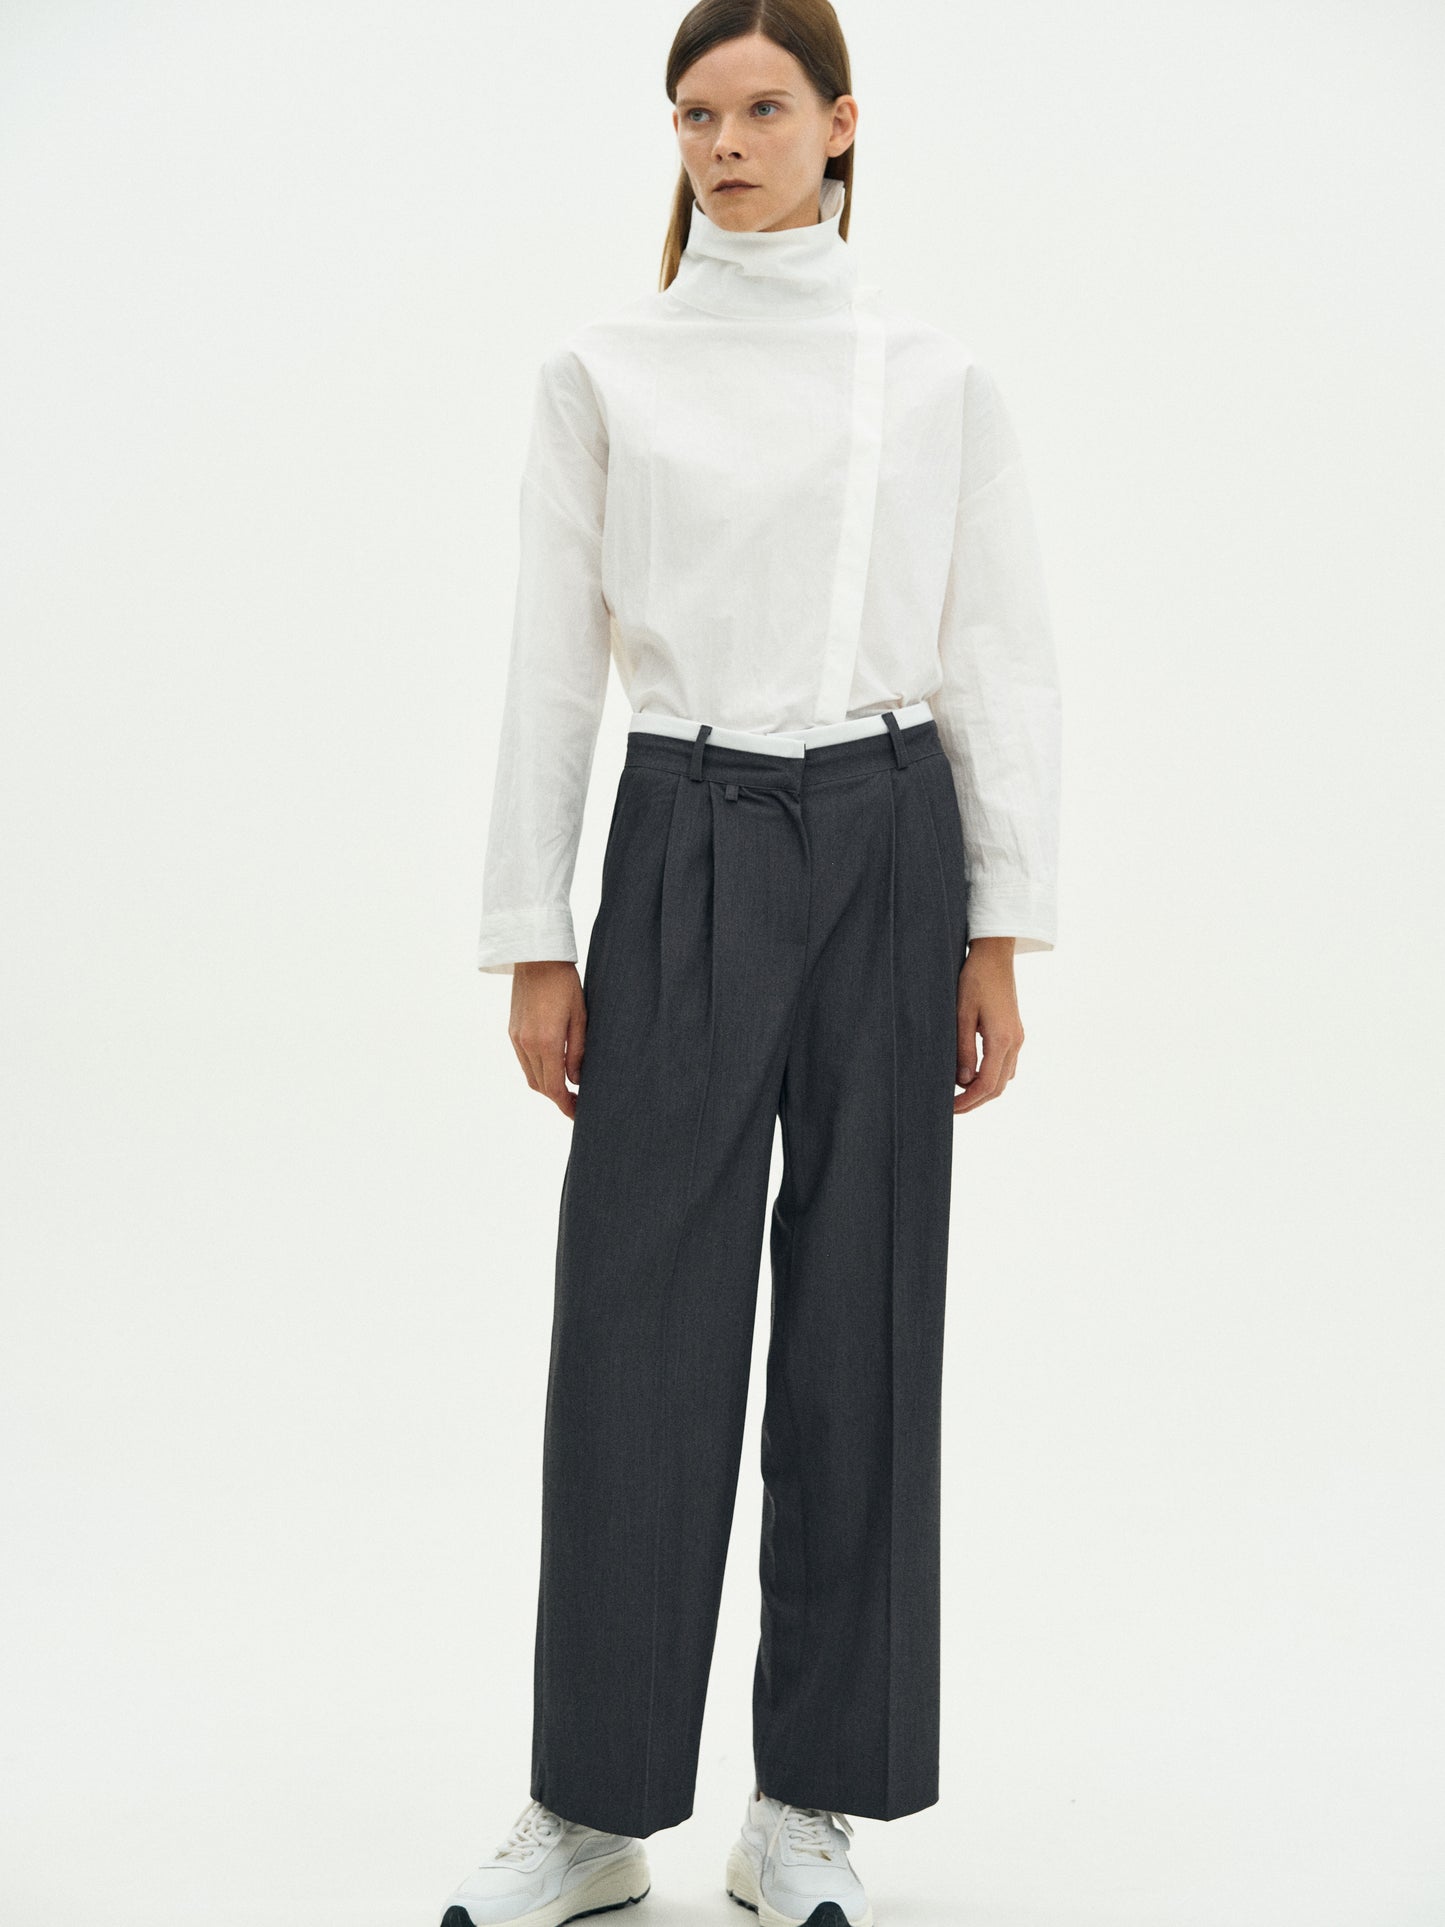 Contrast Waistband Trousers, Anchor – SourceUnknown